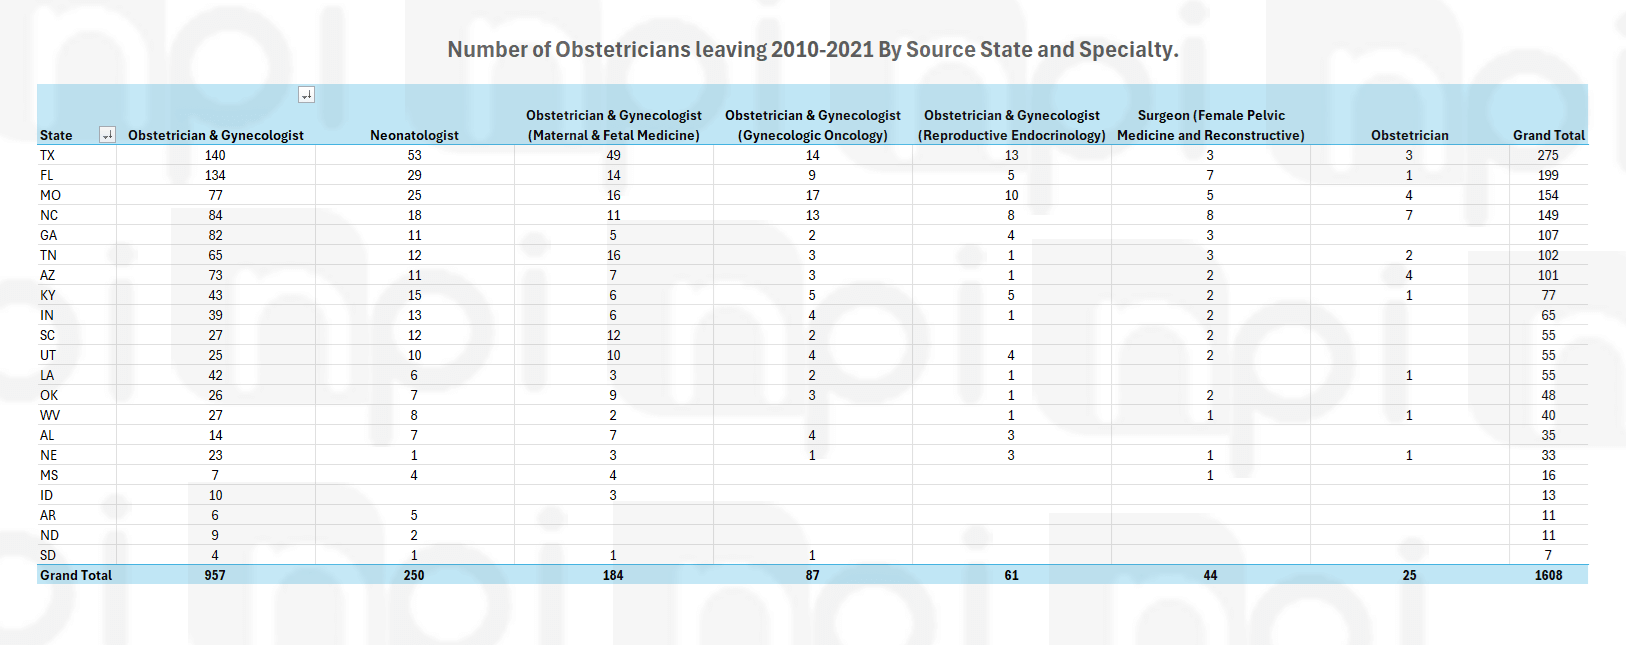 Table showing the specific specialties of the OB-GYNs who have left states with restrictive reproductive health laws from 2010 to 2021